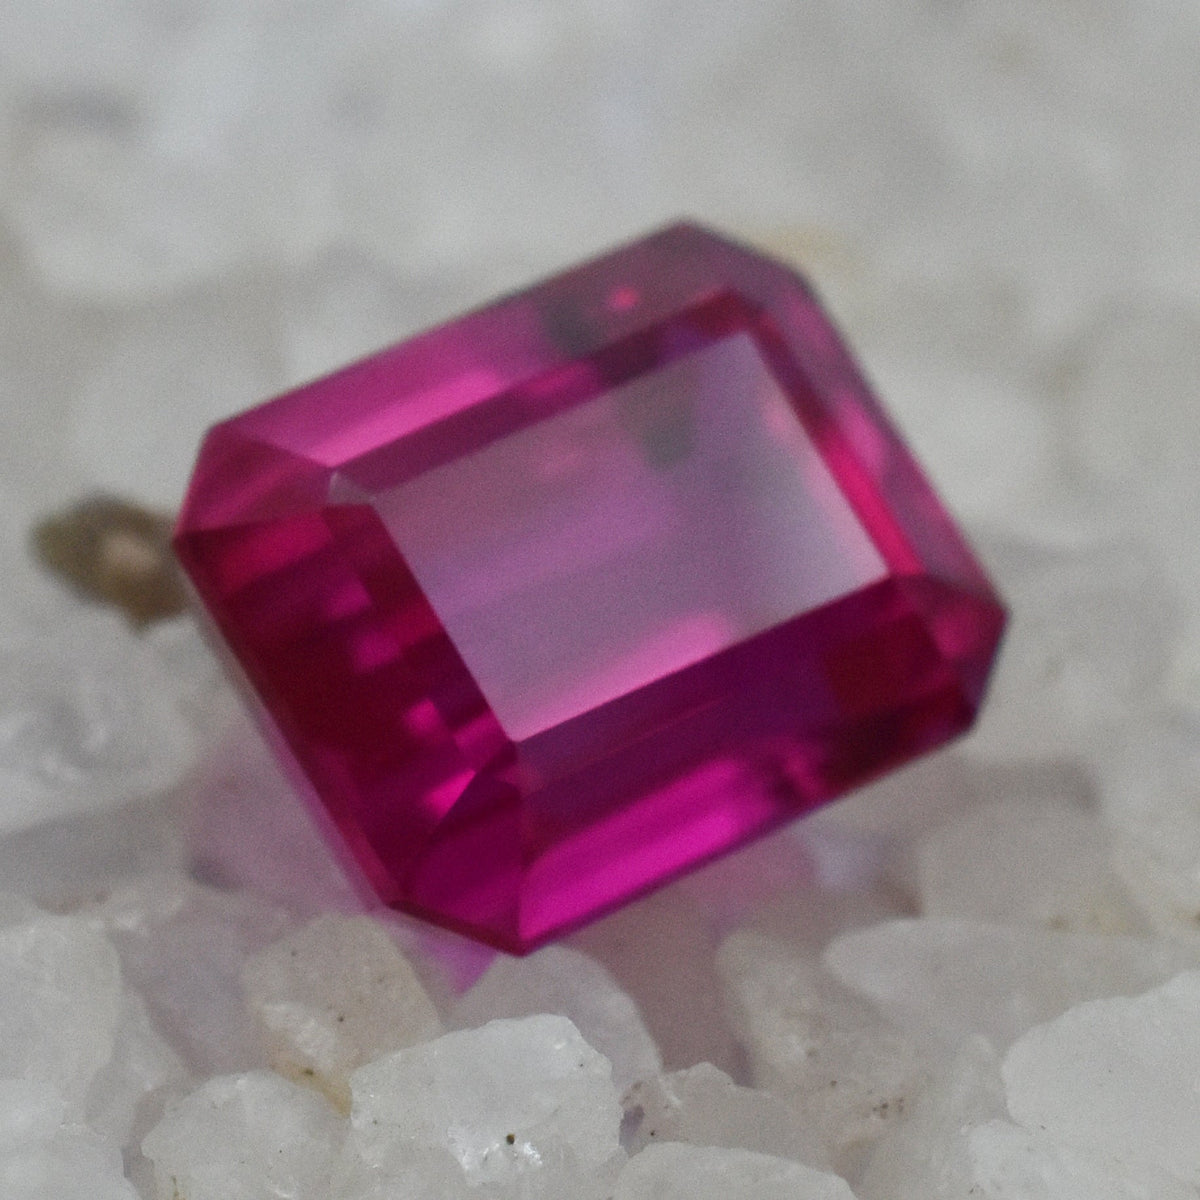 23.85 Ct AAA Flawless Natural Pink Emerald Cut Gemstone Sapphire Loose Emerald Cut Loose Gemstone Pink Sapphire for Jewelry Making